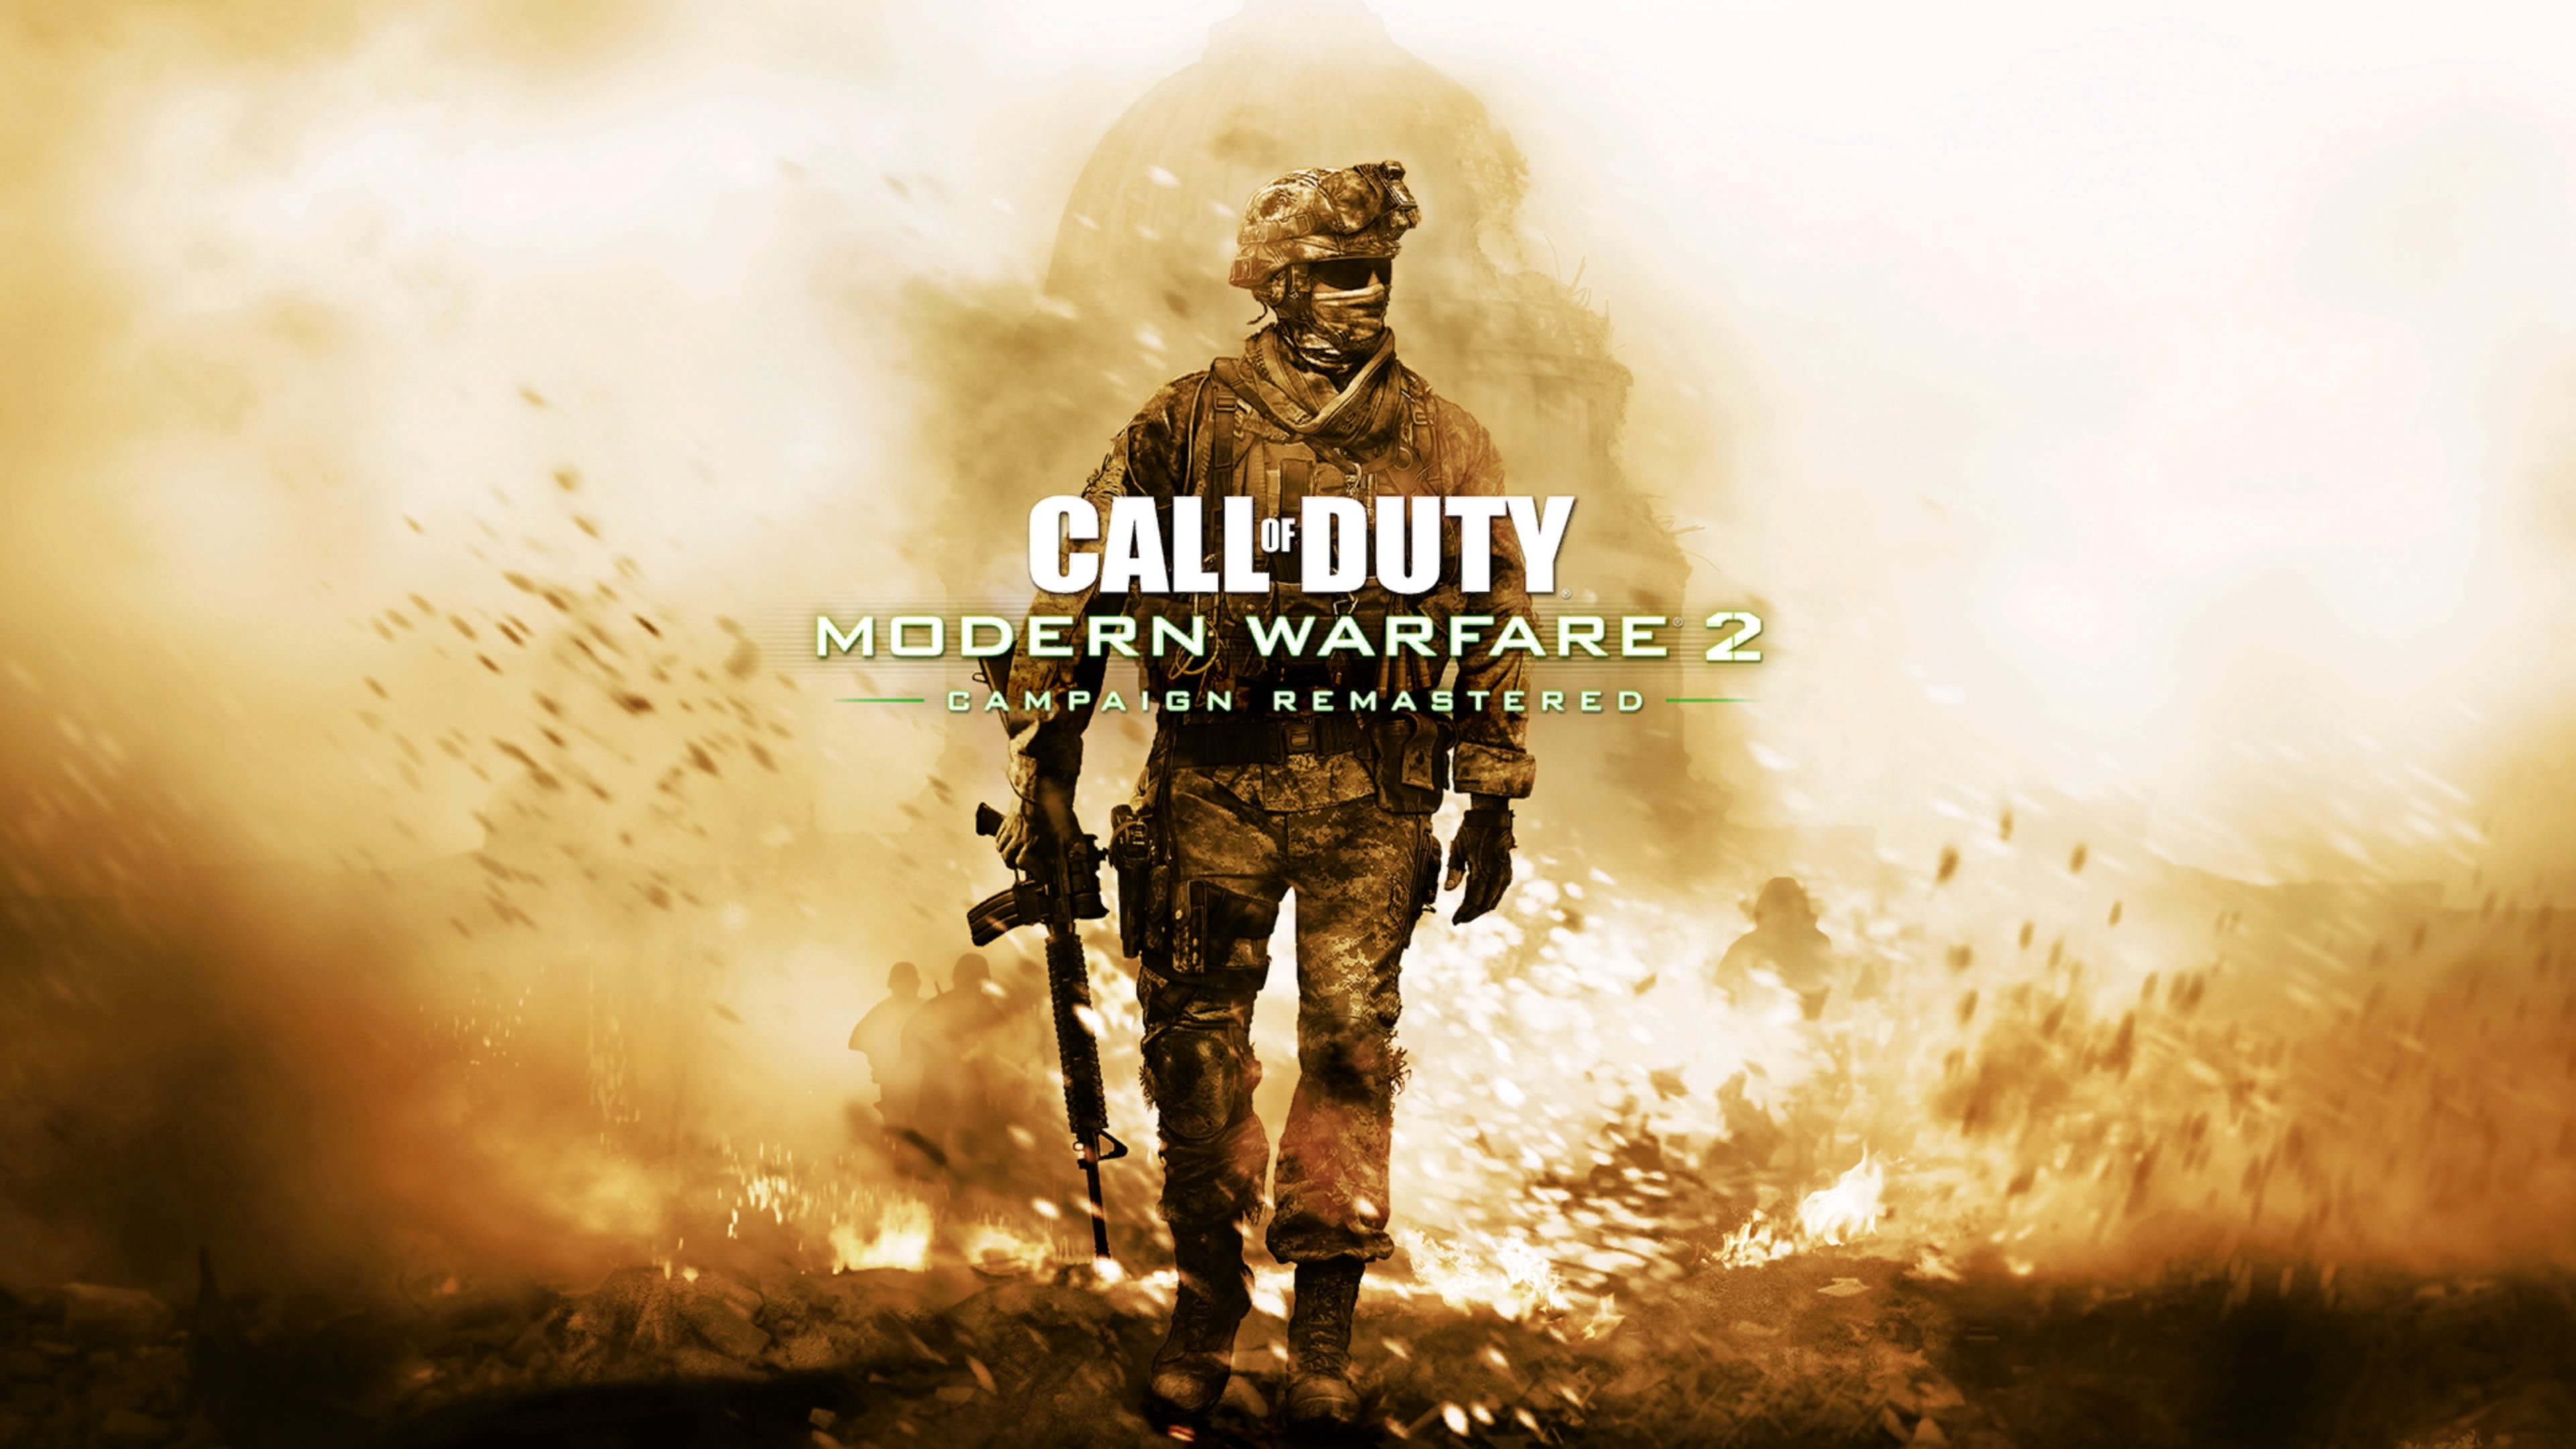 Call of Duty: Modern Warfare 2 Remastered has been rated in South